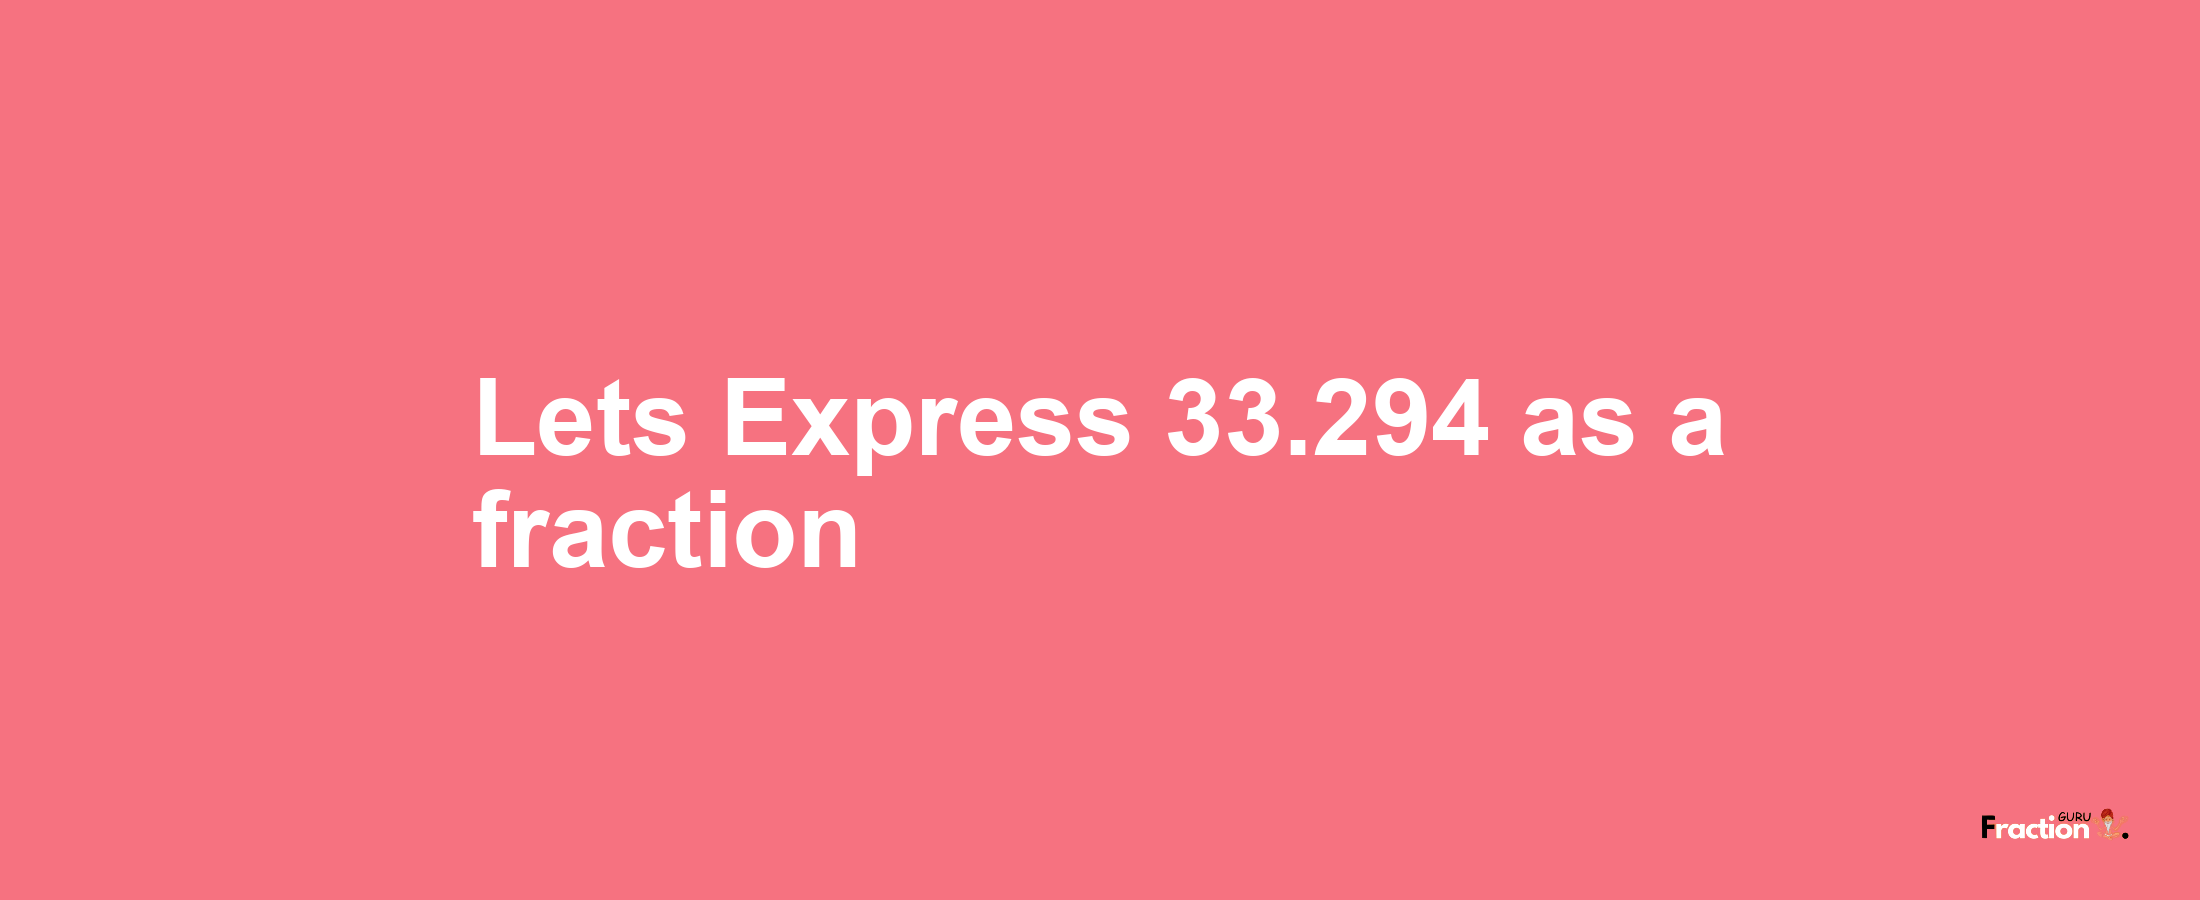 Lets Express 33.294 as afraction